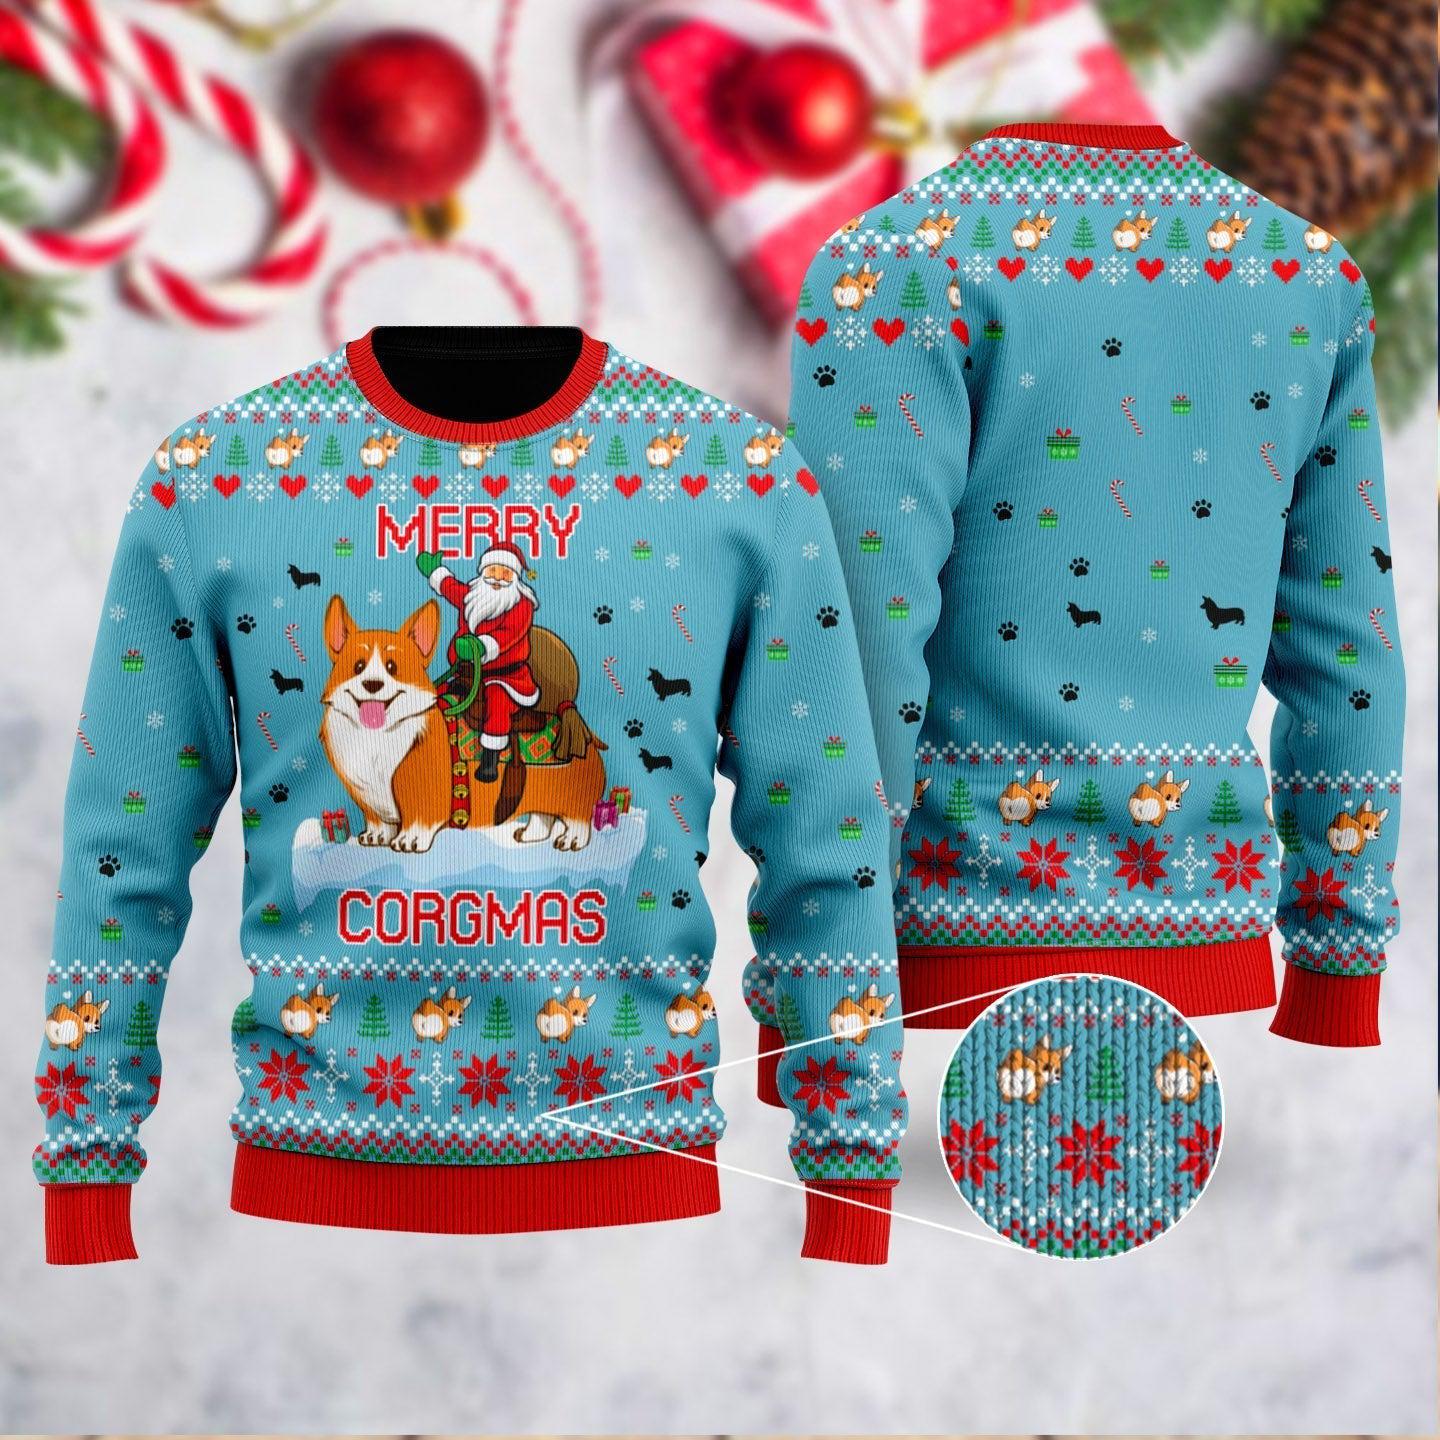 Funny Dog & Santa Claus Merry Corgmas Christmas Sweater, Ugly Sweater For Men & Women, Perfect Outfit For Christmas New Year Autumn Winter